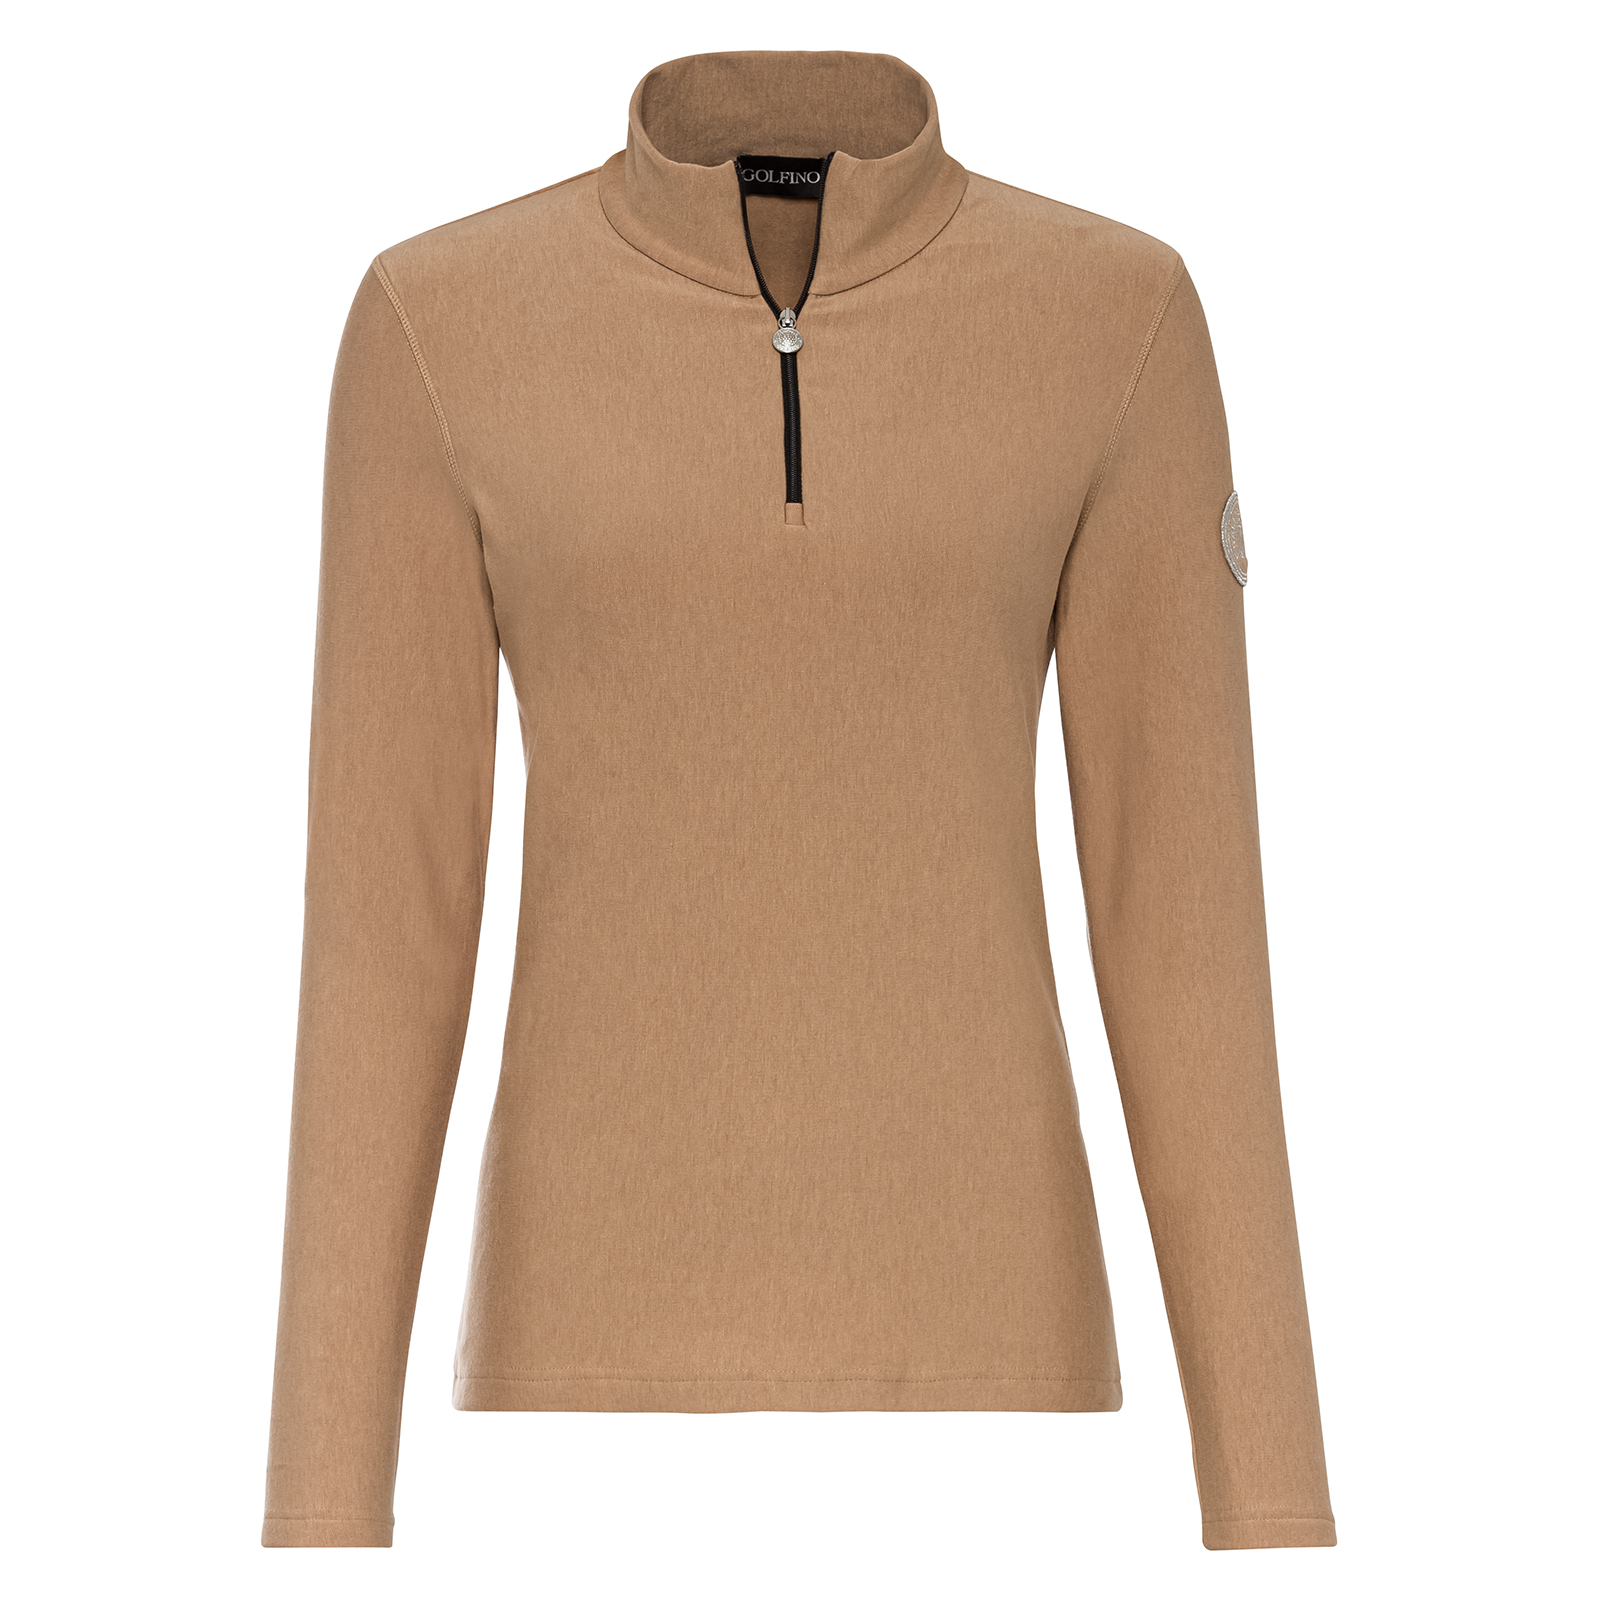 Ladies' soft sweater made from a sustainable blend of natural fibres 